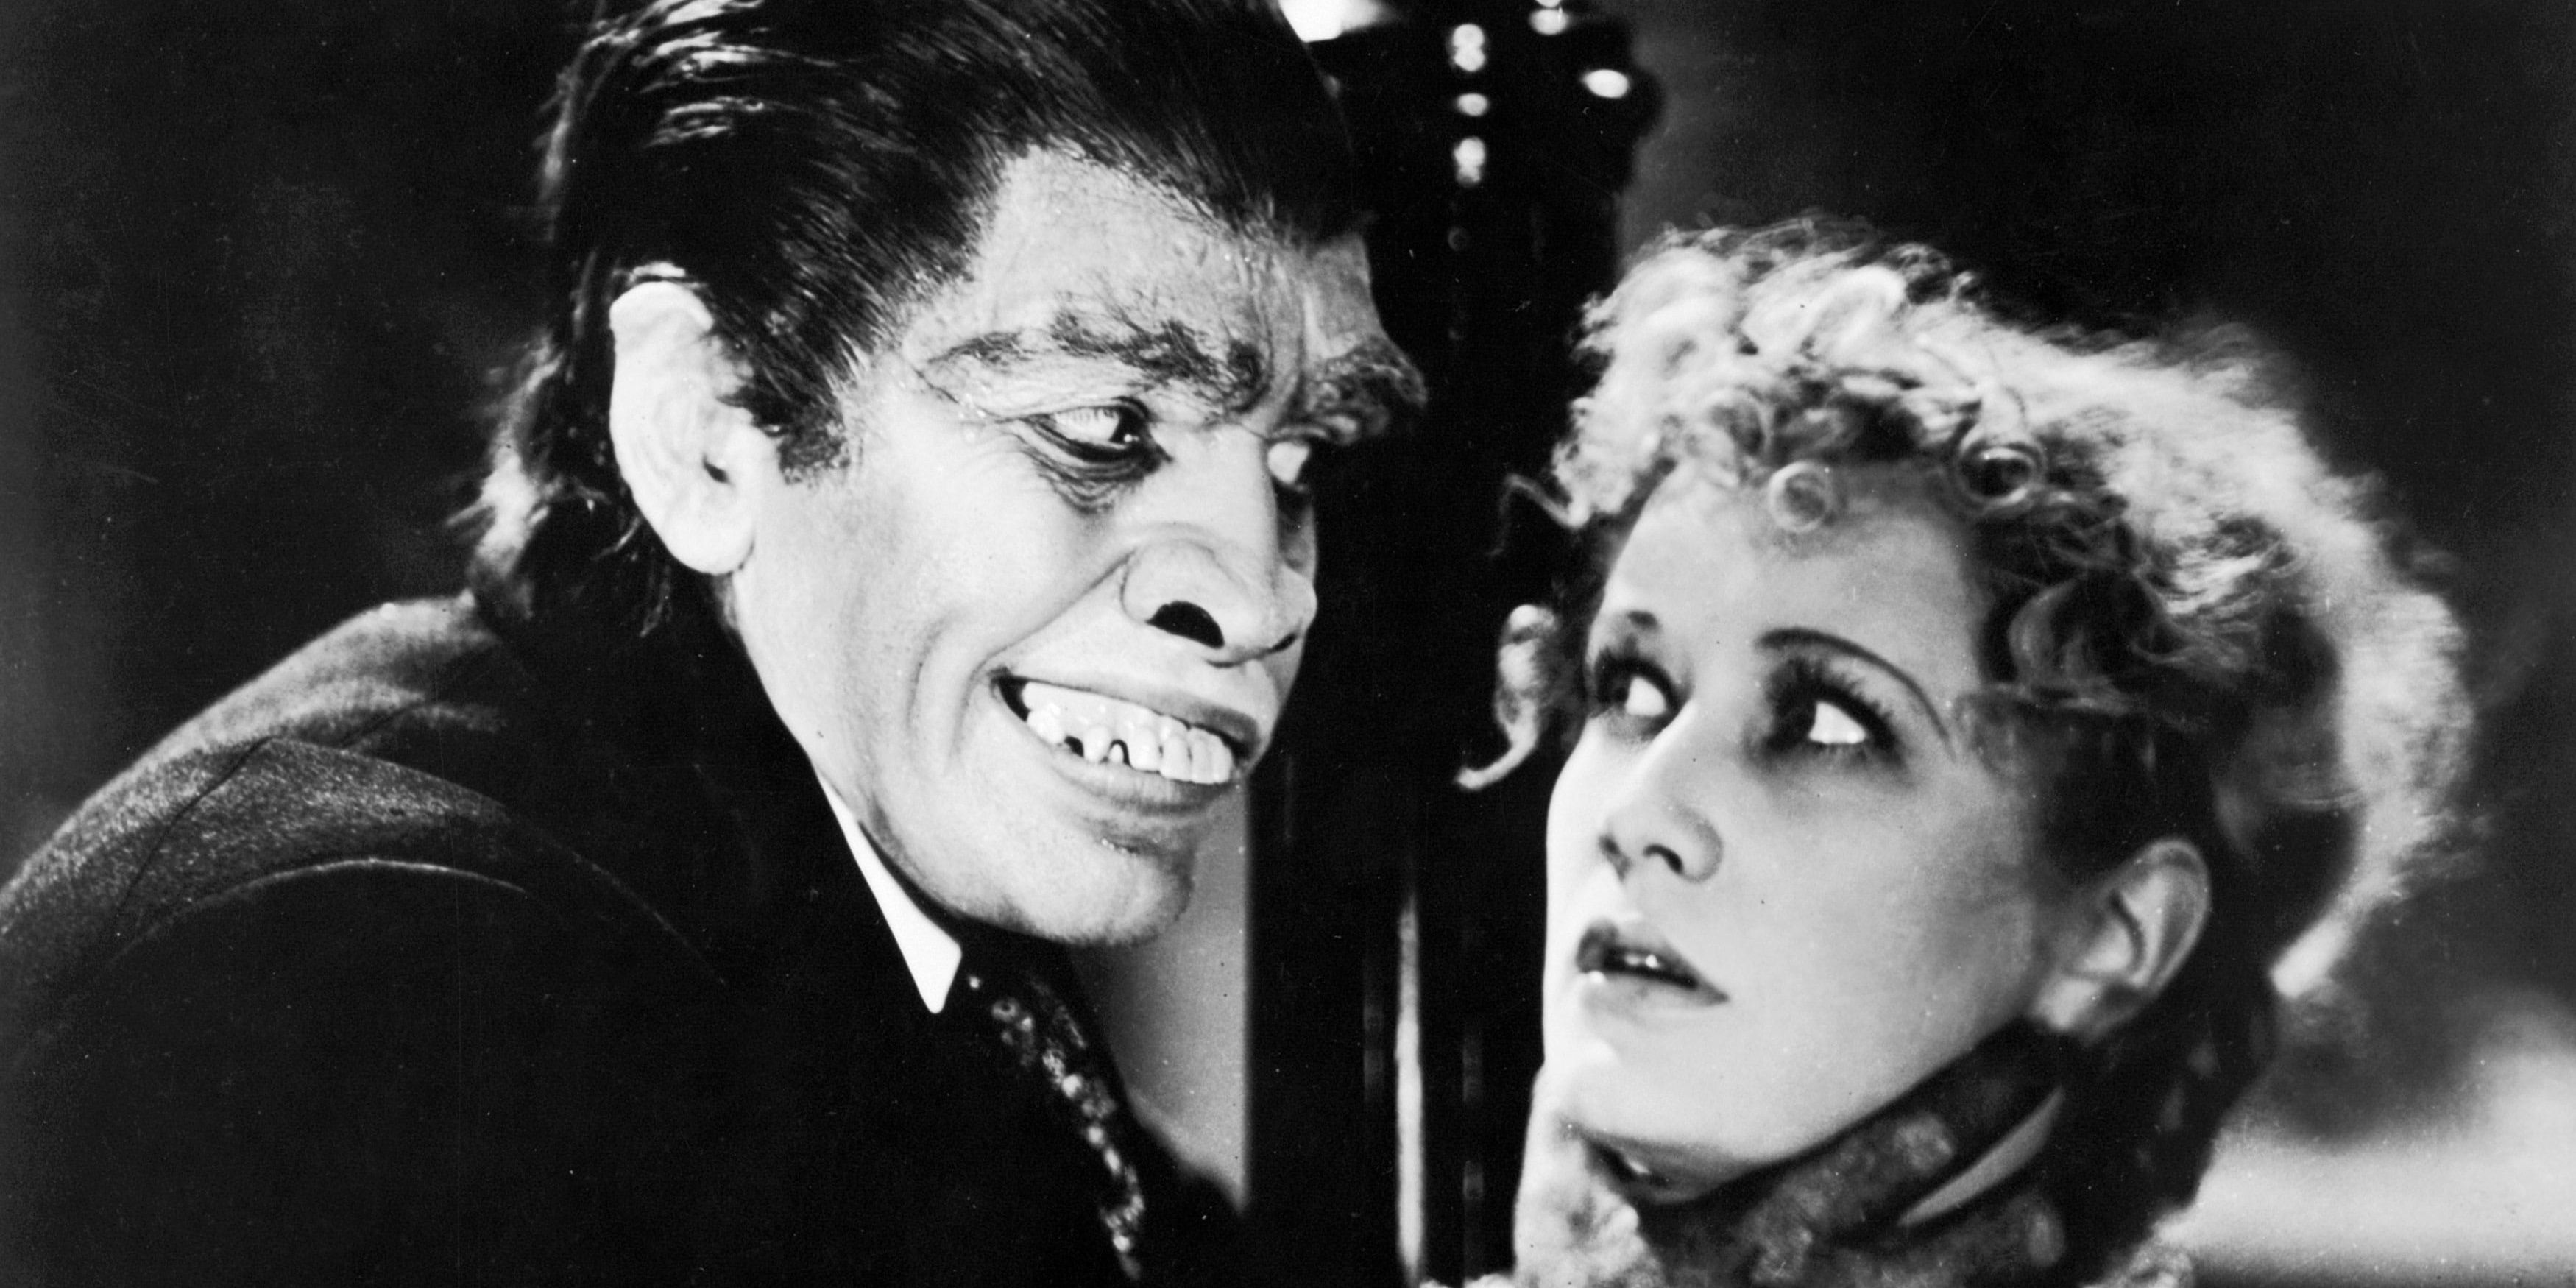 Mr Hyde attacks a woman in Dr Jekyll and Mr Hyde 1931